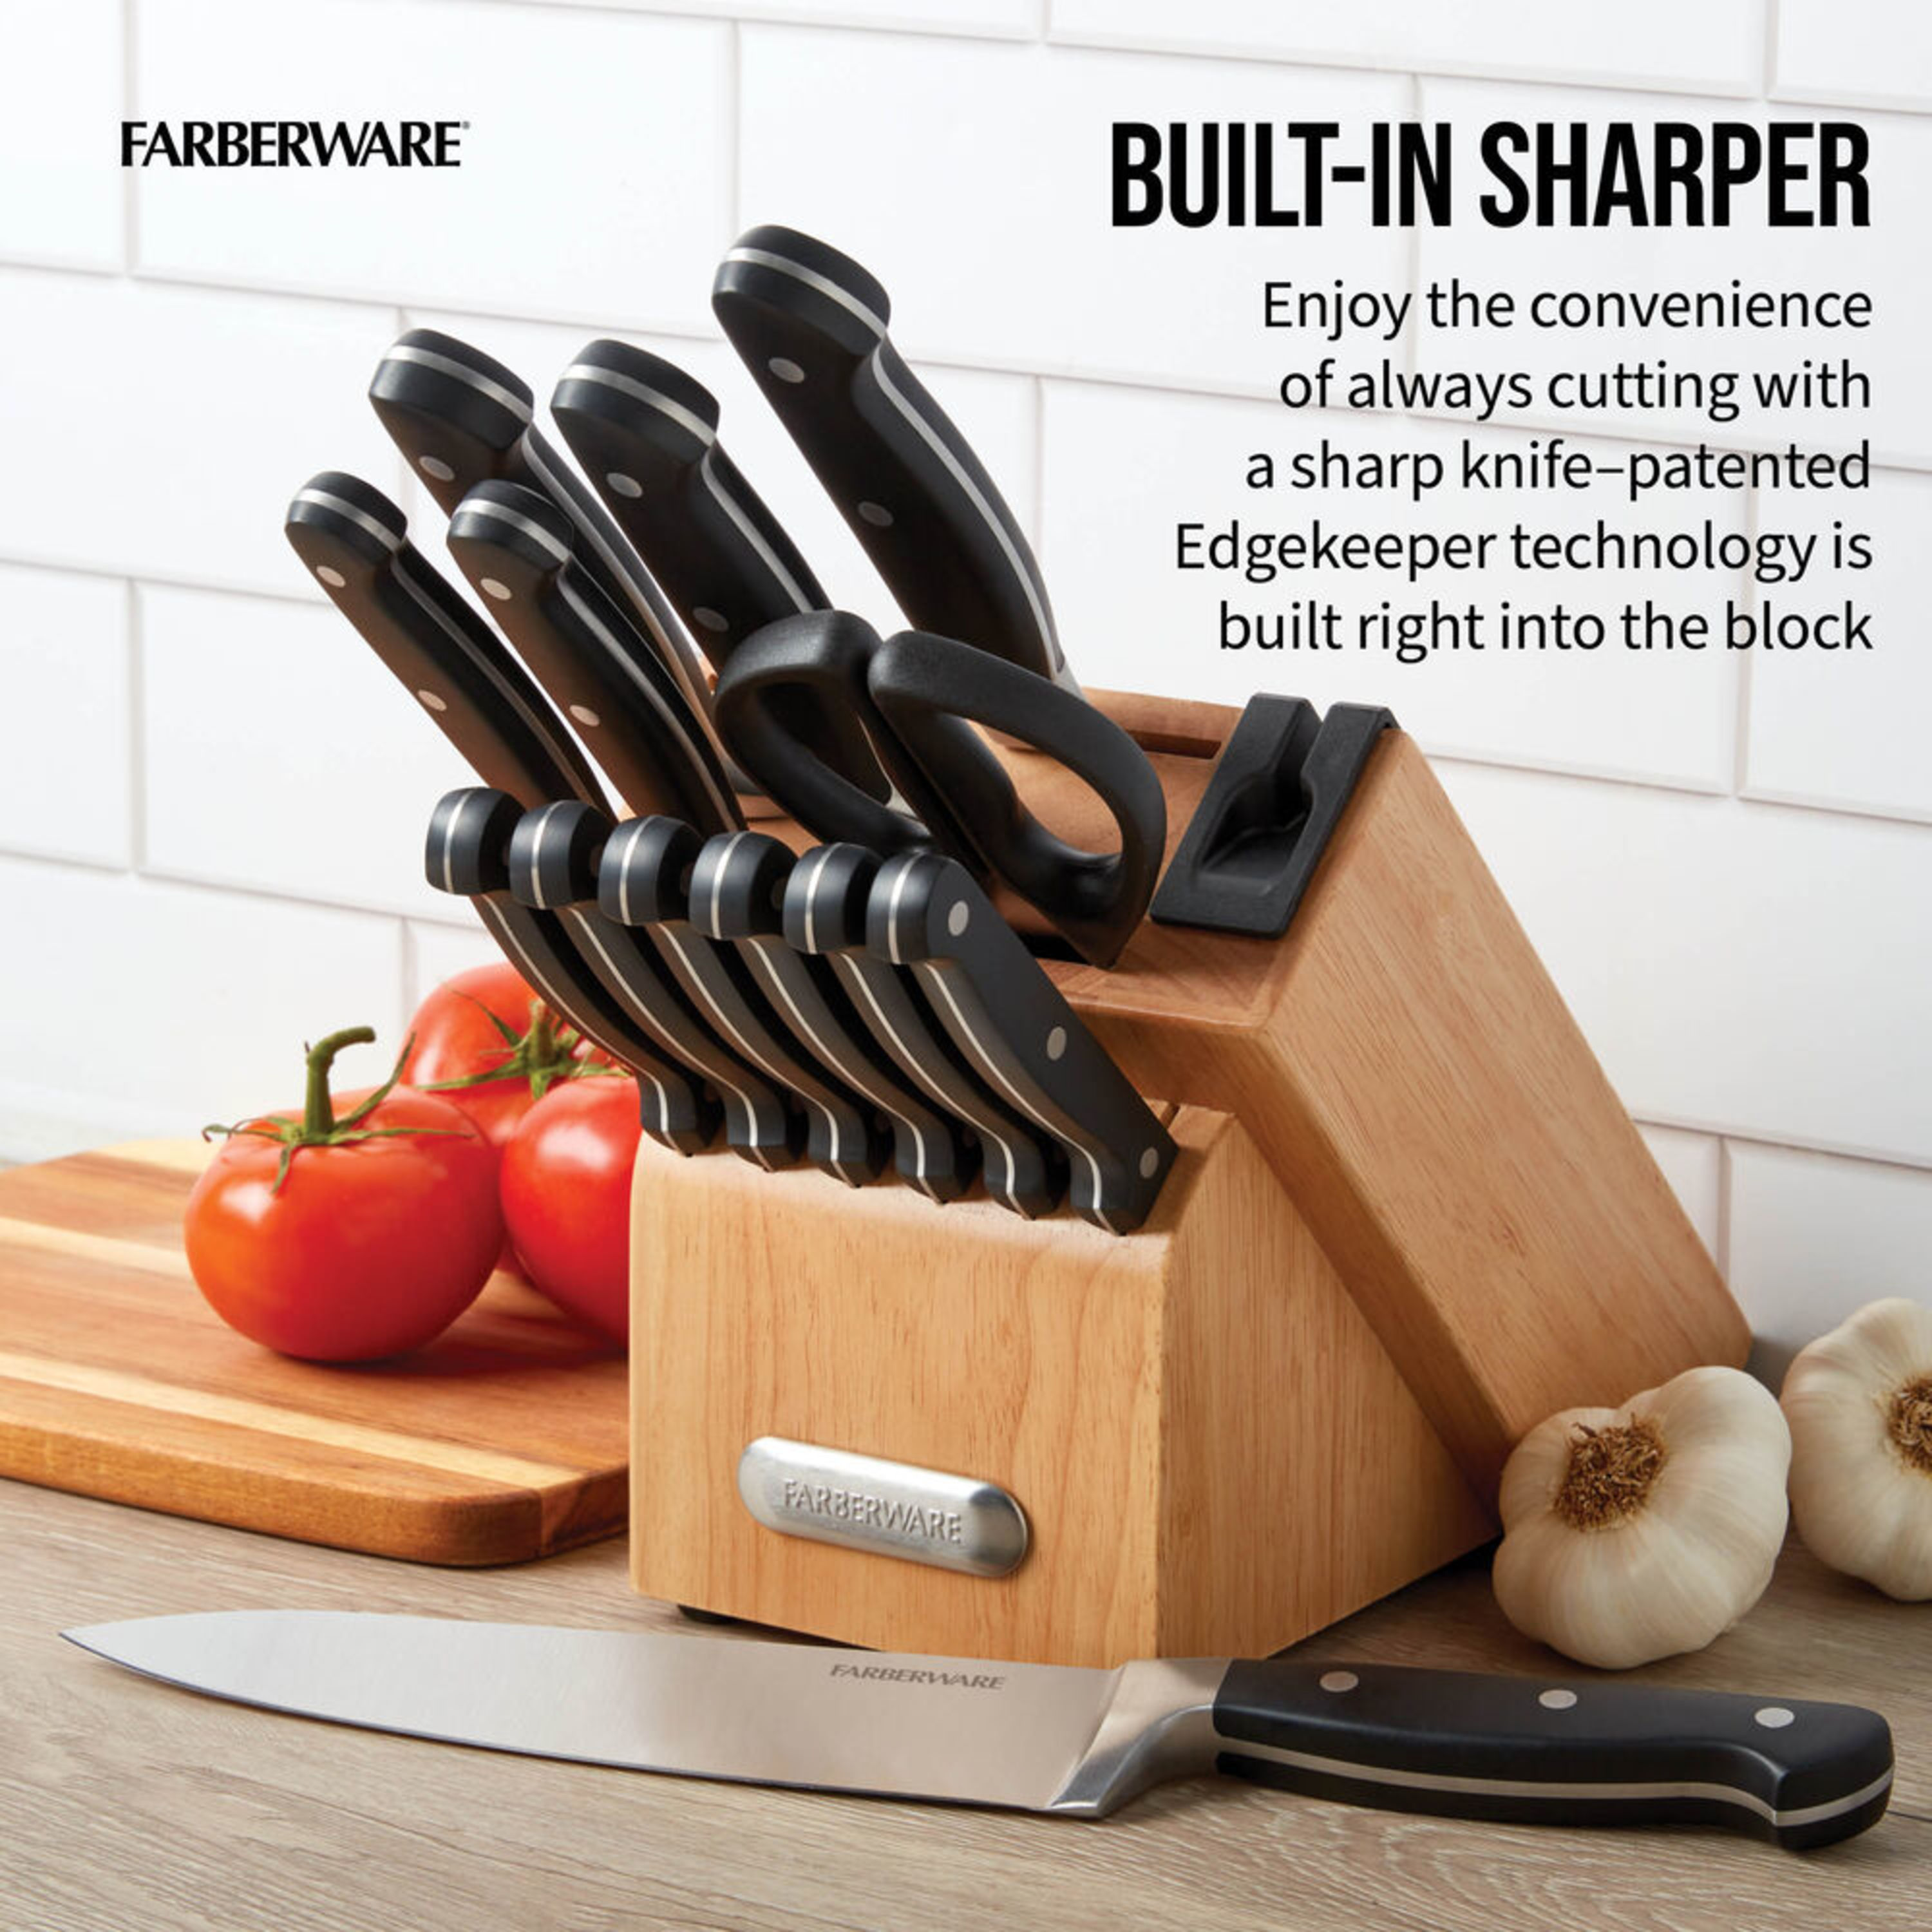 Farberware 14-Piece Forged Triple Rivet Knife Set with Built-in Edgekeeper Knife Sharpener - image 4 of 10